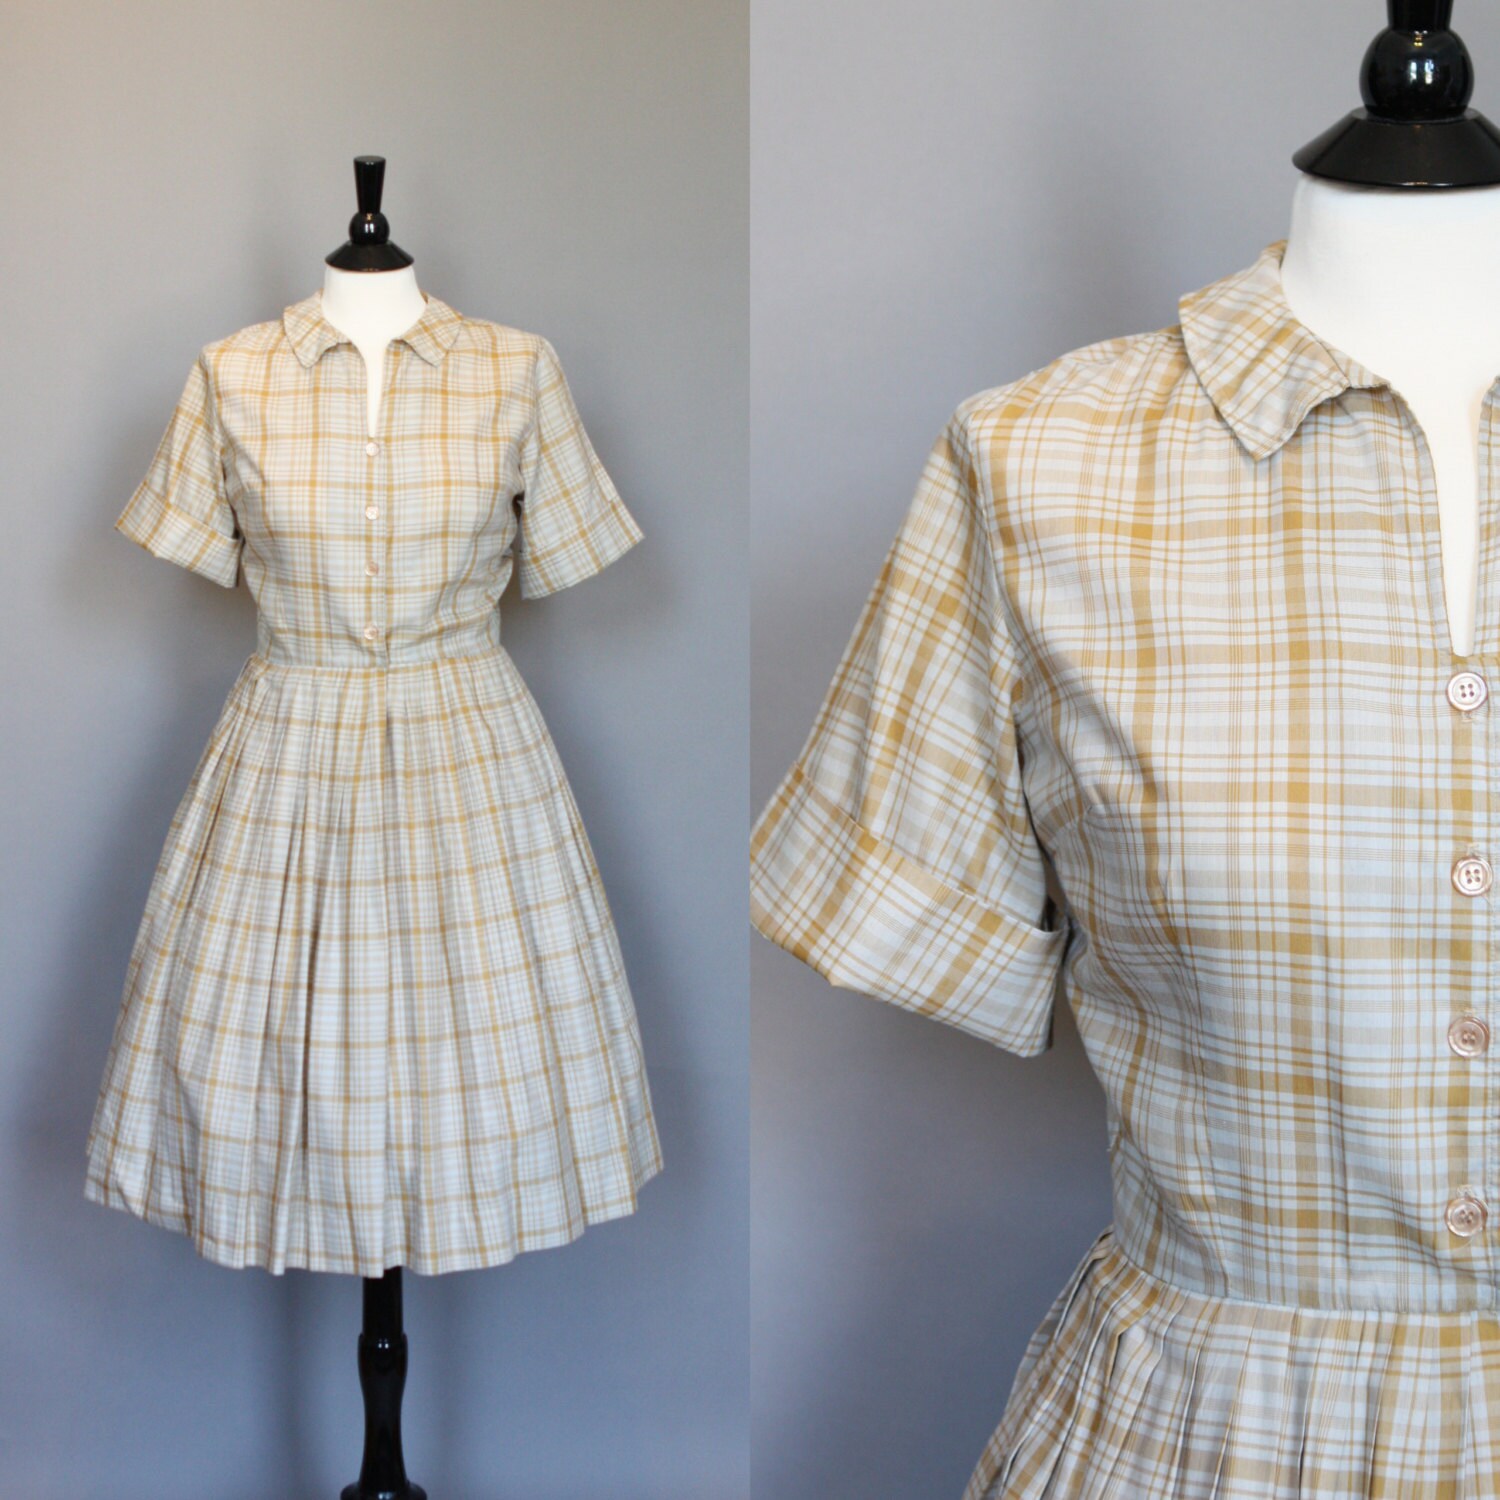 Vintage 60s Dress 1960s Plaid Day Dress Full by persnicketyvintage